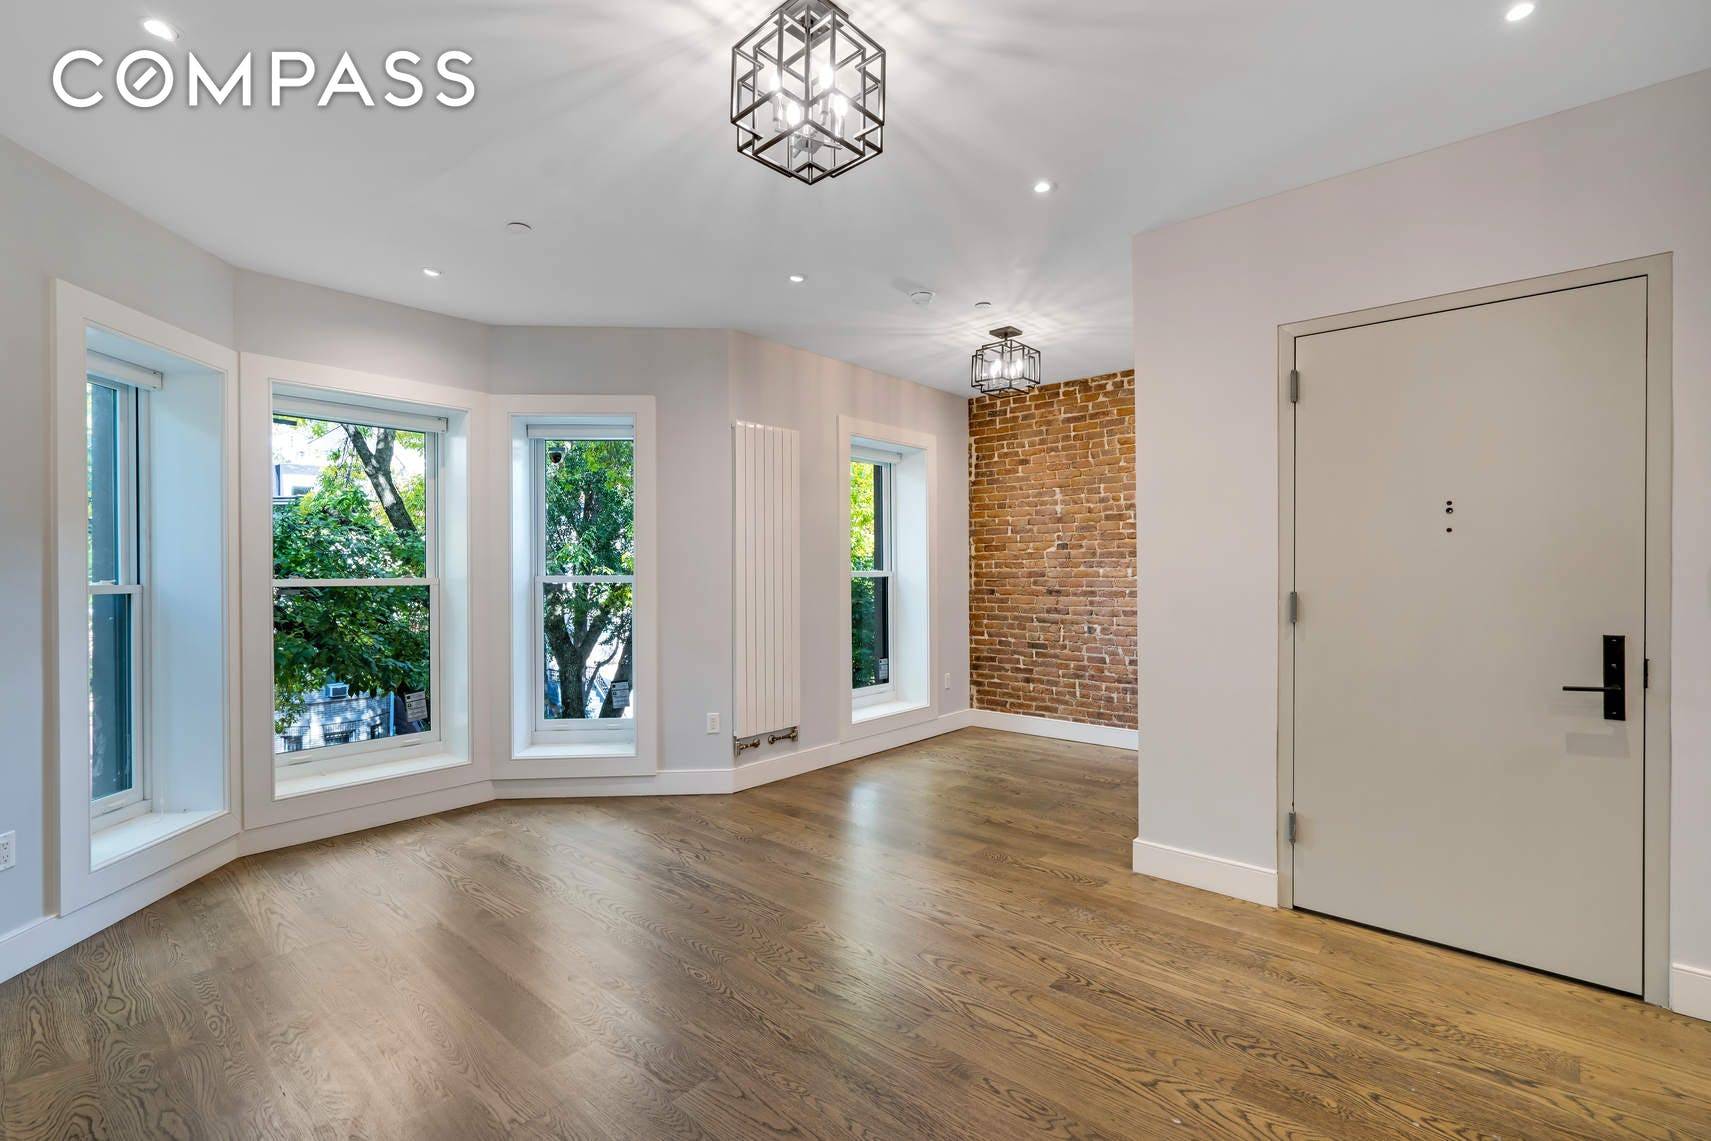 No detail spared in this beautiful fully renovated second floor apartment.